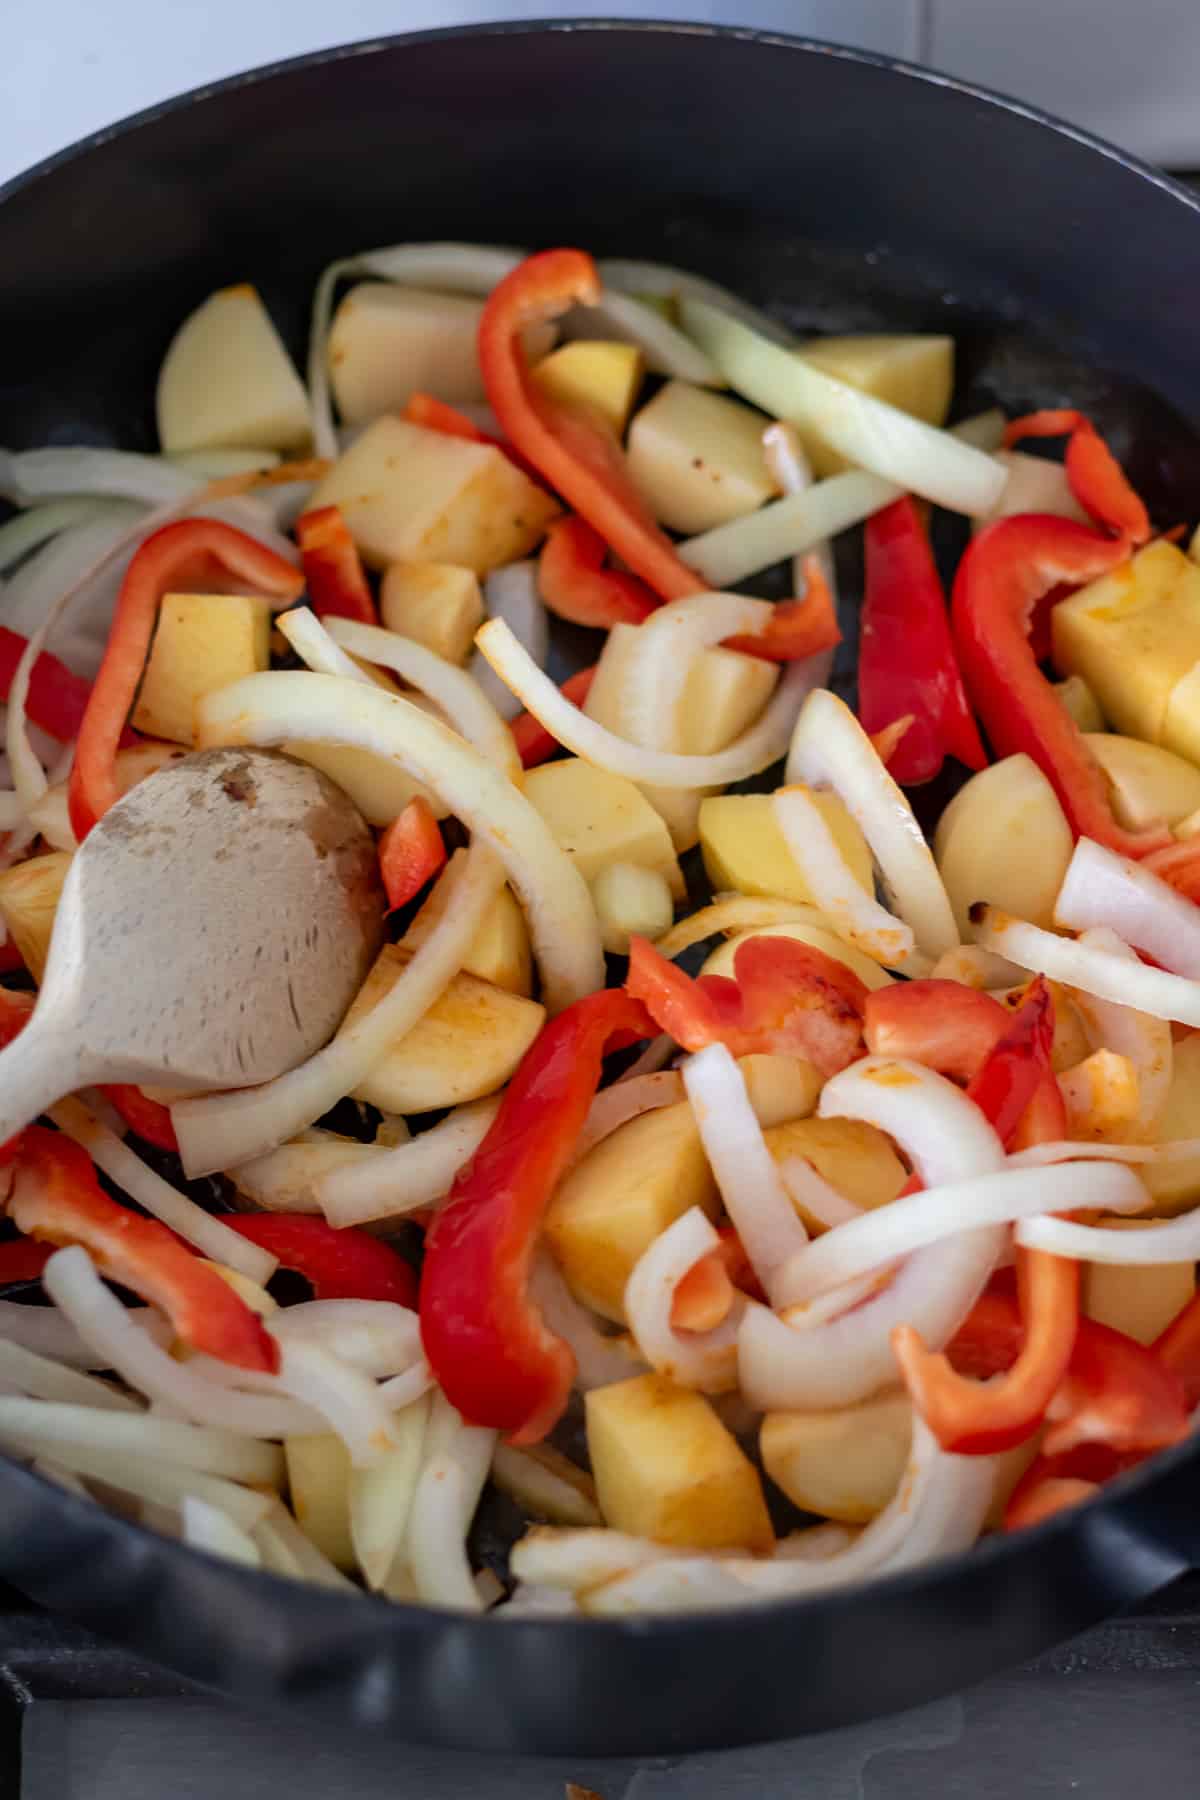 Diced potatoes, sliced onions and peppers in a pan cooking.